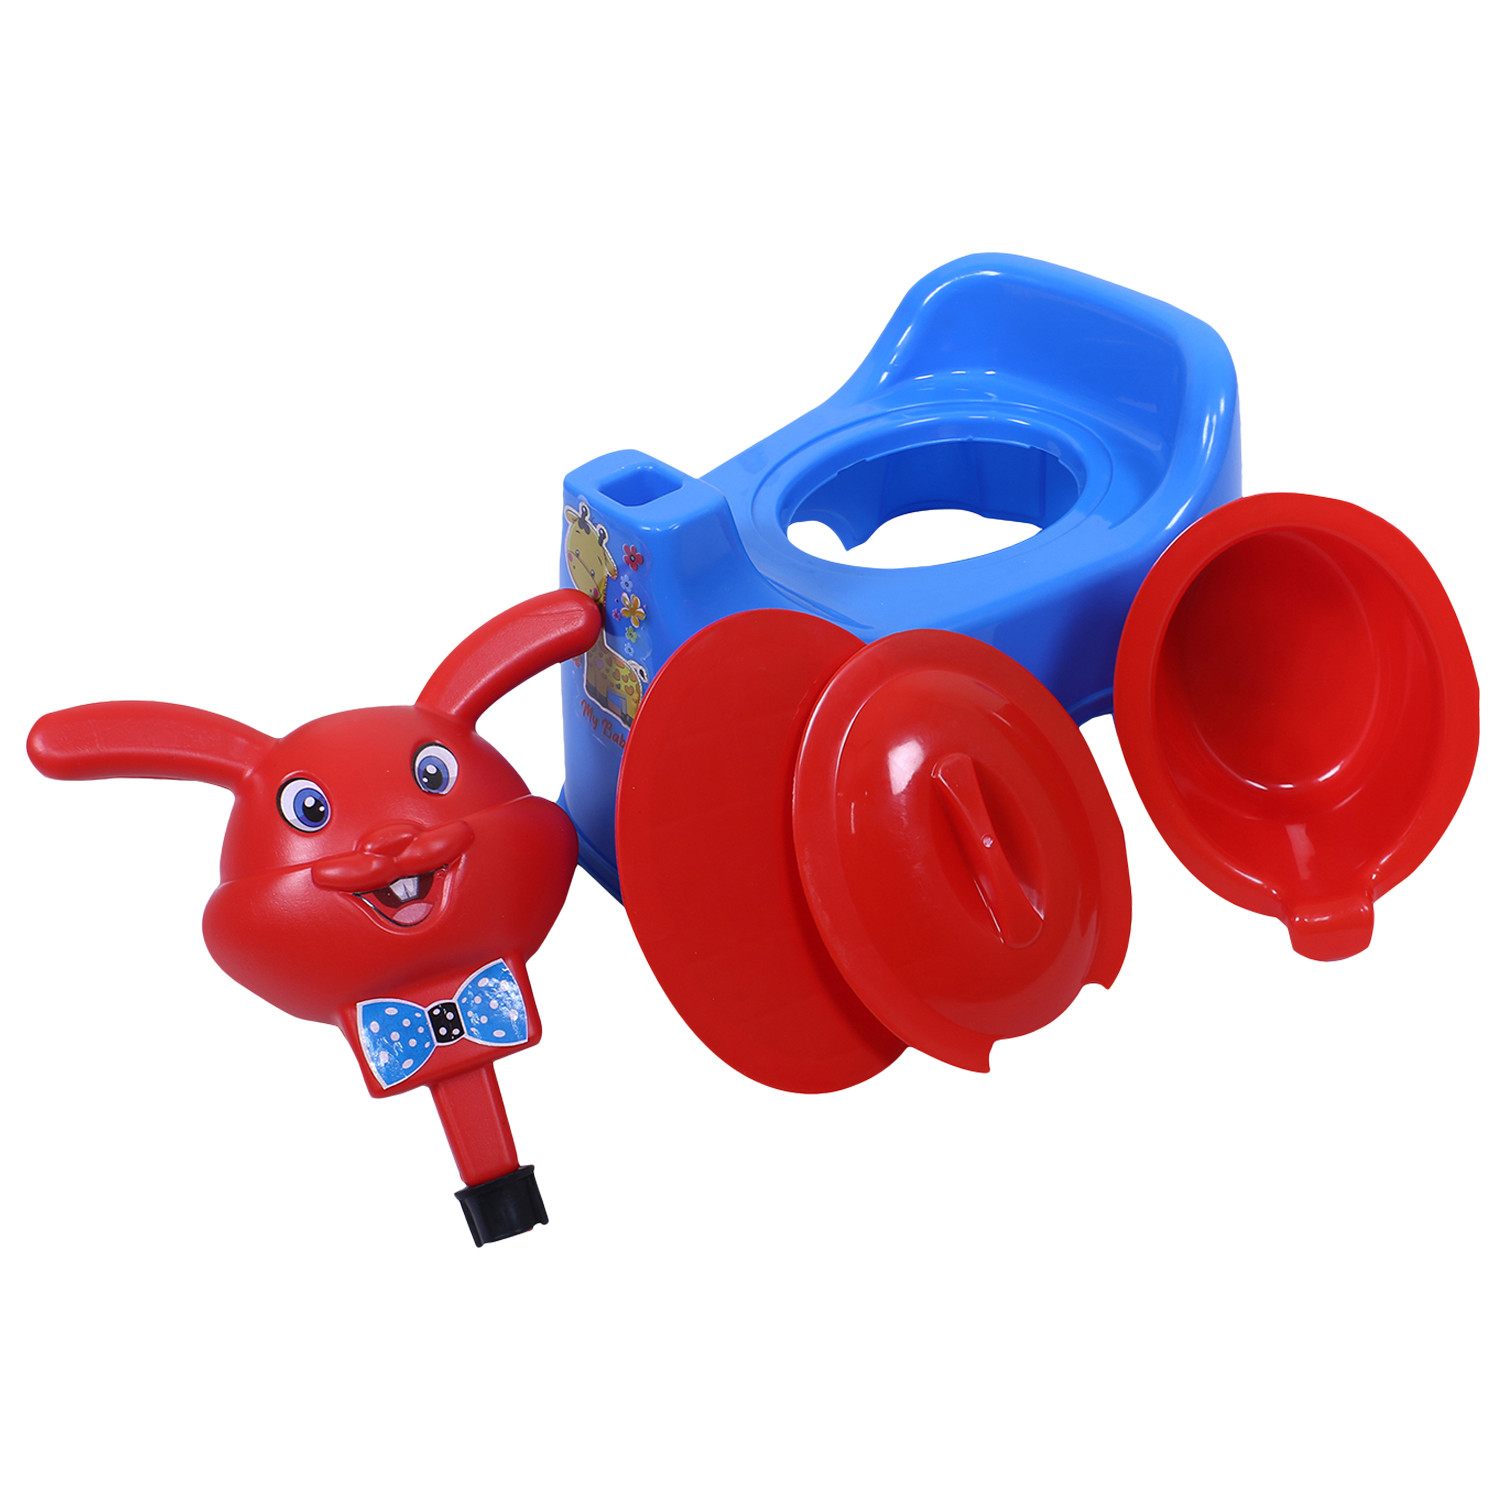 Kuber Industries Potty Toilet Trainer Seat | Plastic Potty Training Seat | Baby Potty Seat | Potty Seat For Child | Potty Training Seat for Kids | Rabbit Design | Red & Blue